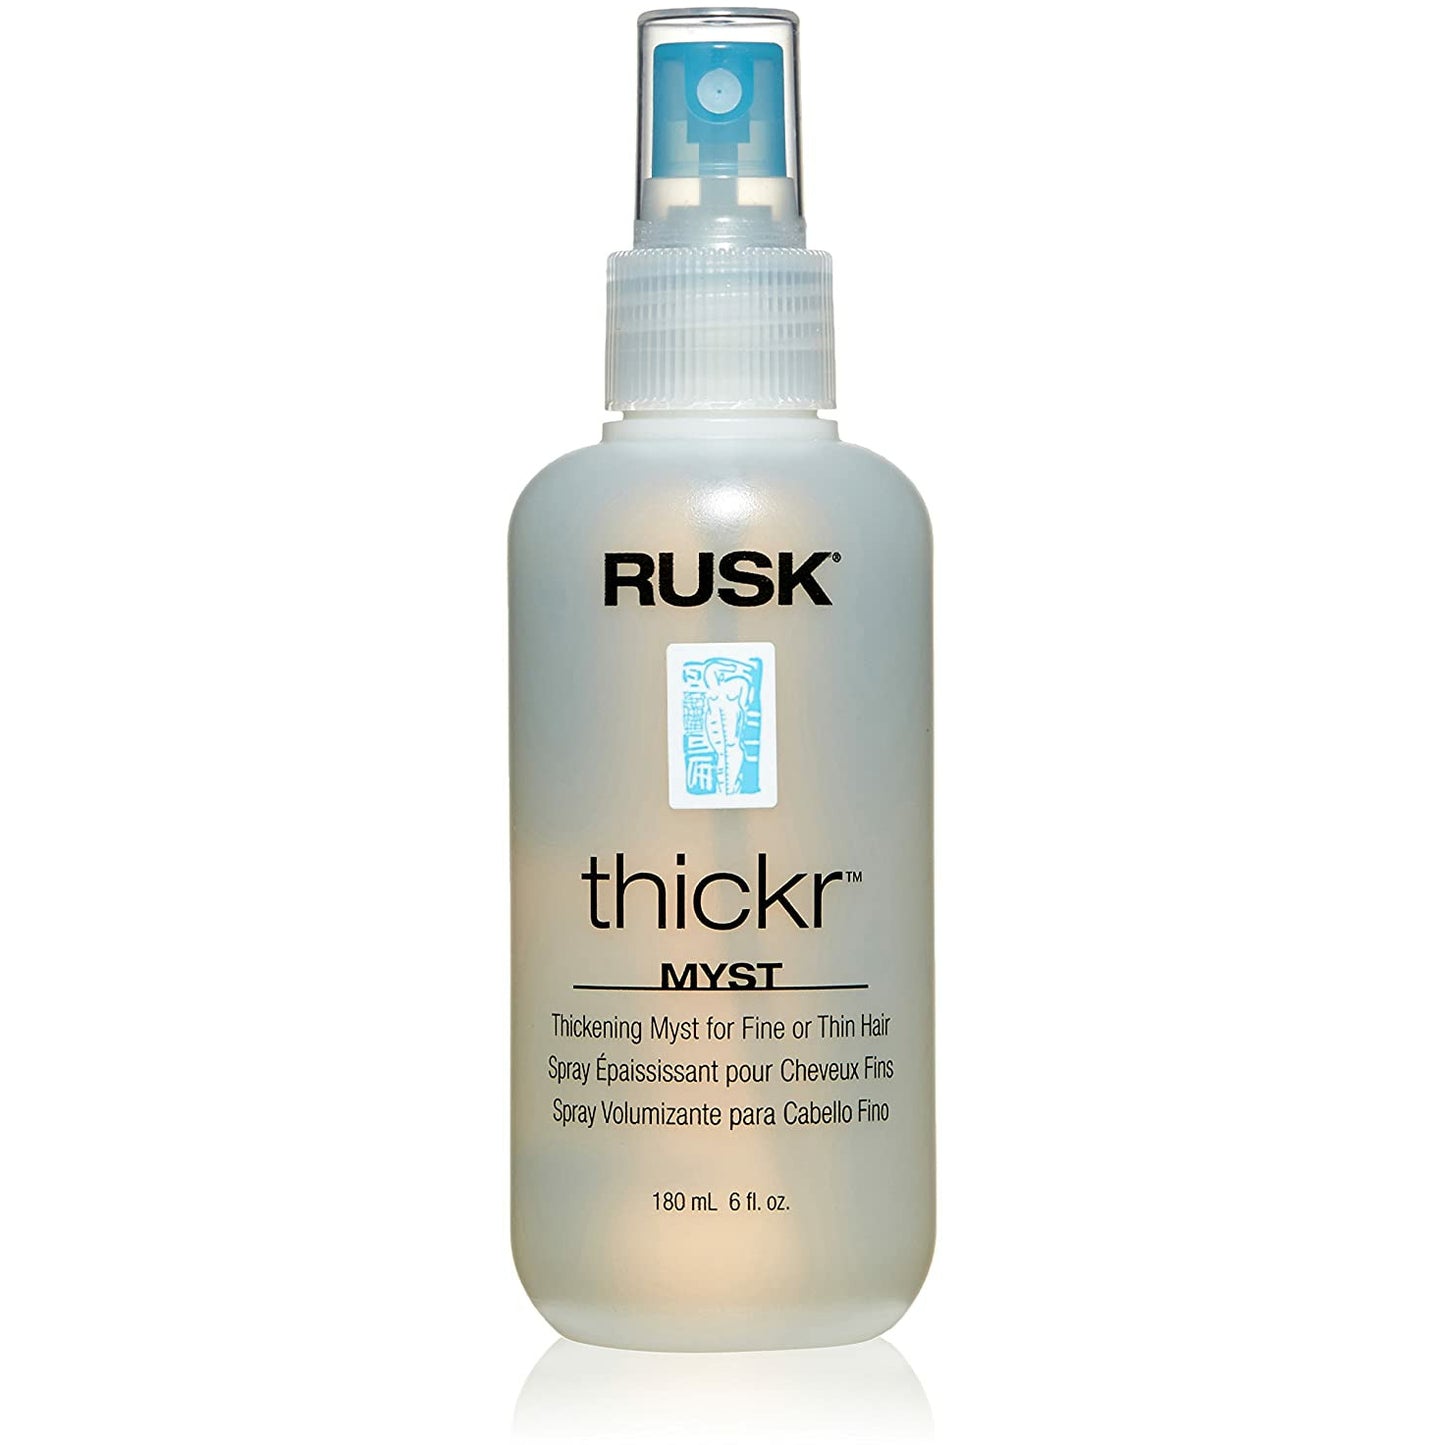 RUSK Designer Collection Thicker Thickening Myst for Fine or Thin Hair